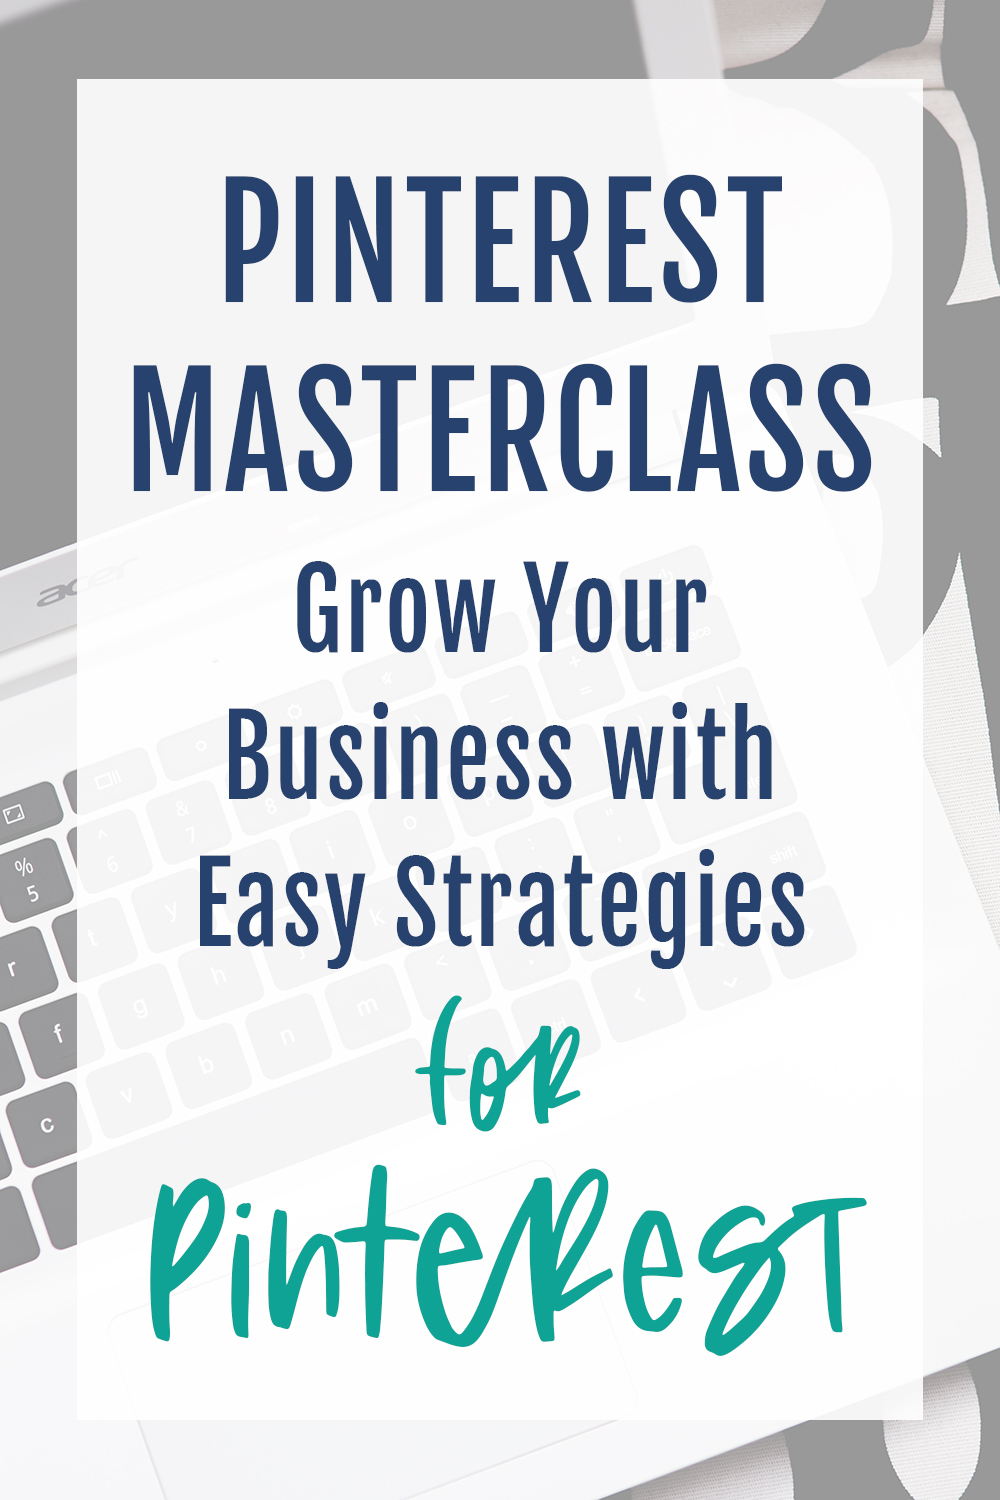 Pinterest Masterclass: Grow Your Business with Easy Strategies for Pinterest! How Set Your Business Up on Pinterest to Get More Traffic & Leads